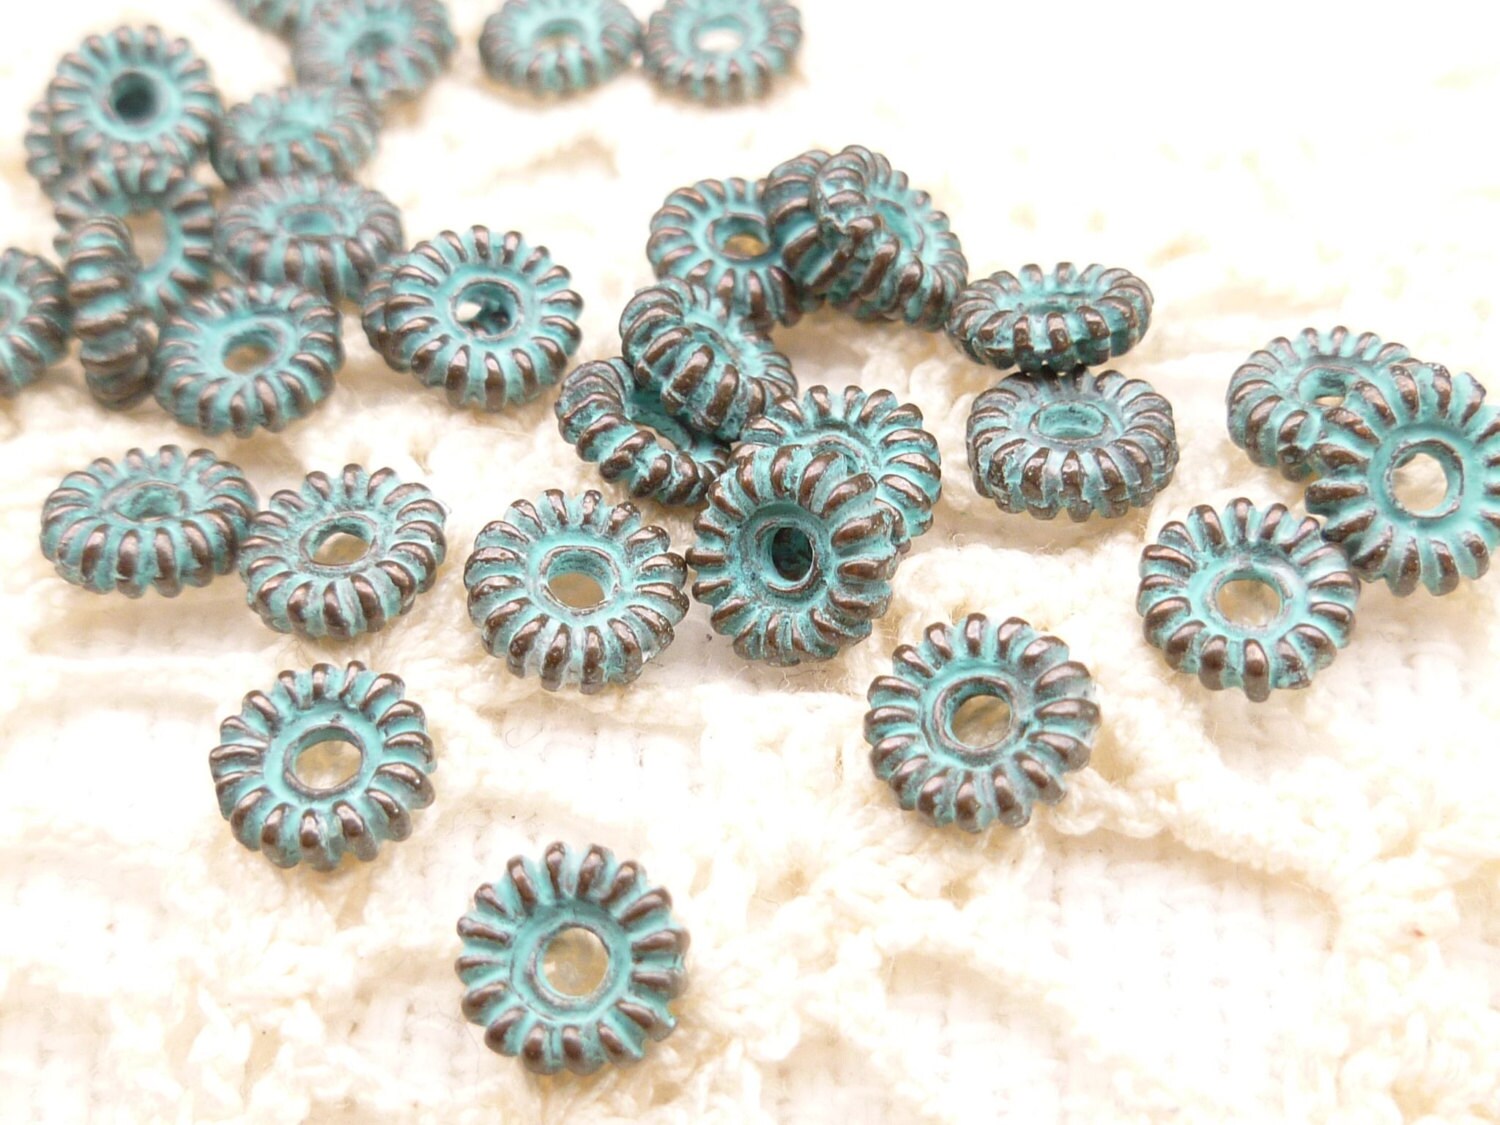 6mm Grover Daisy Spacer Beads Rustic Patina Beads Mykonos | Etsy